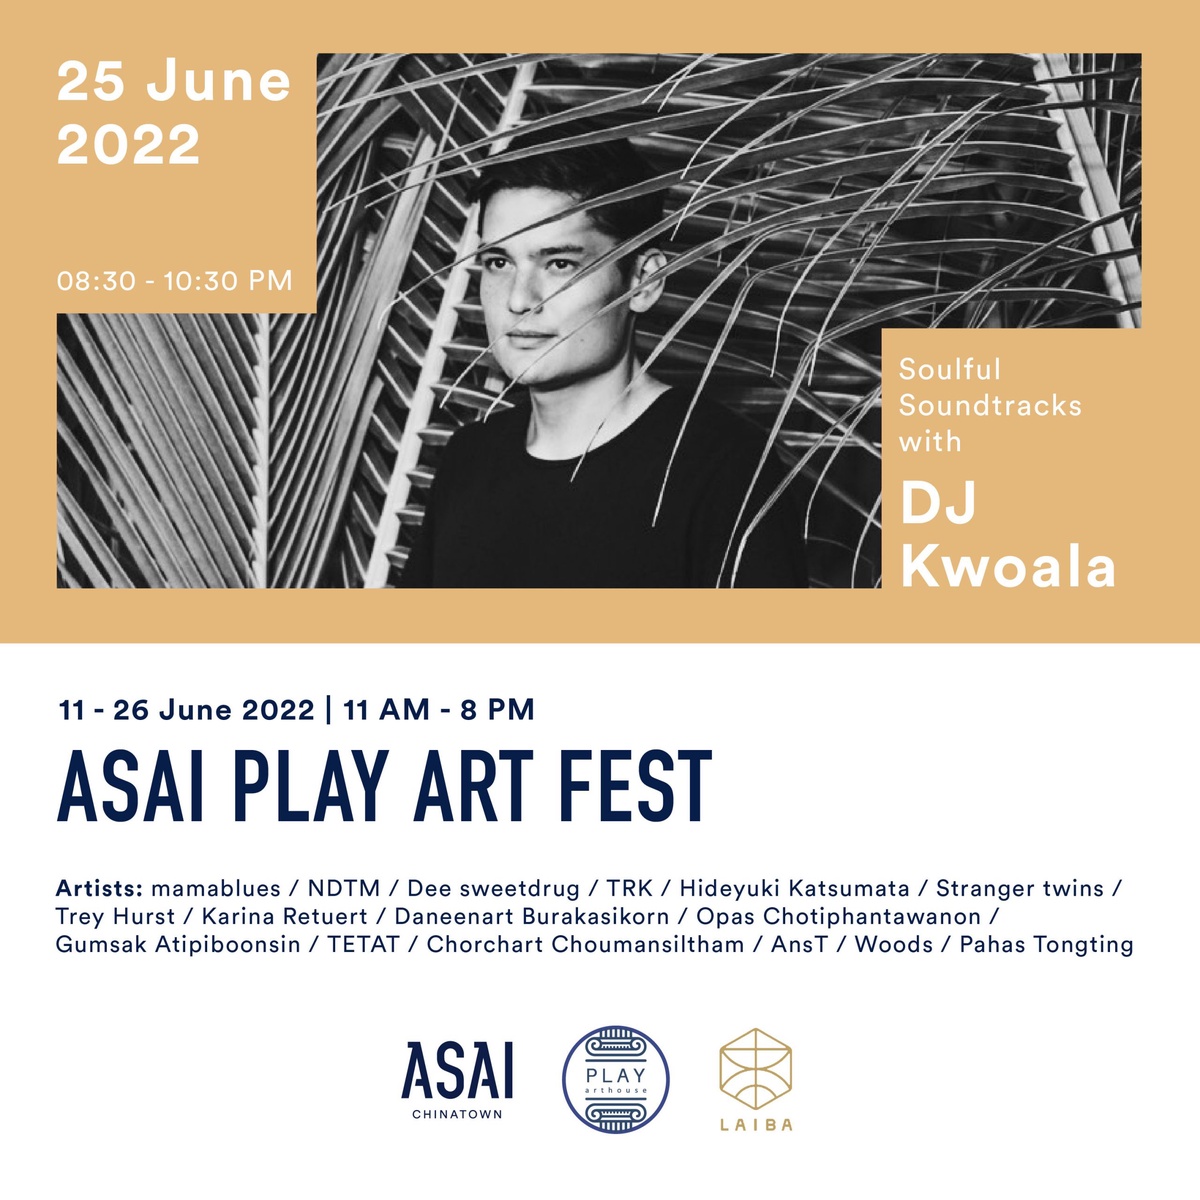 ASAI Bangkok Chinatown hotel transforms into interactive art gallery showcasing local and international talent over three vibrant weekends this